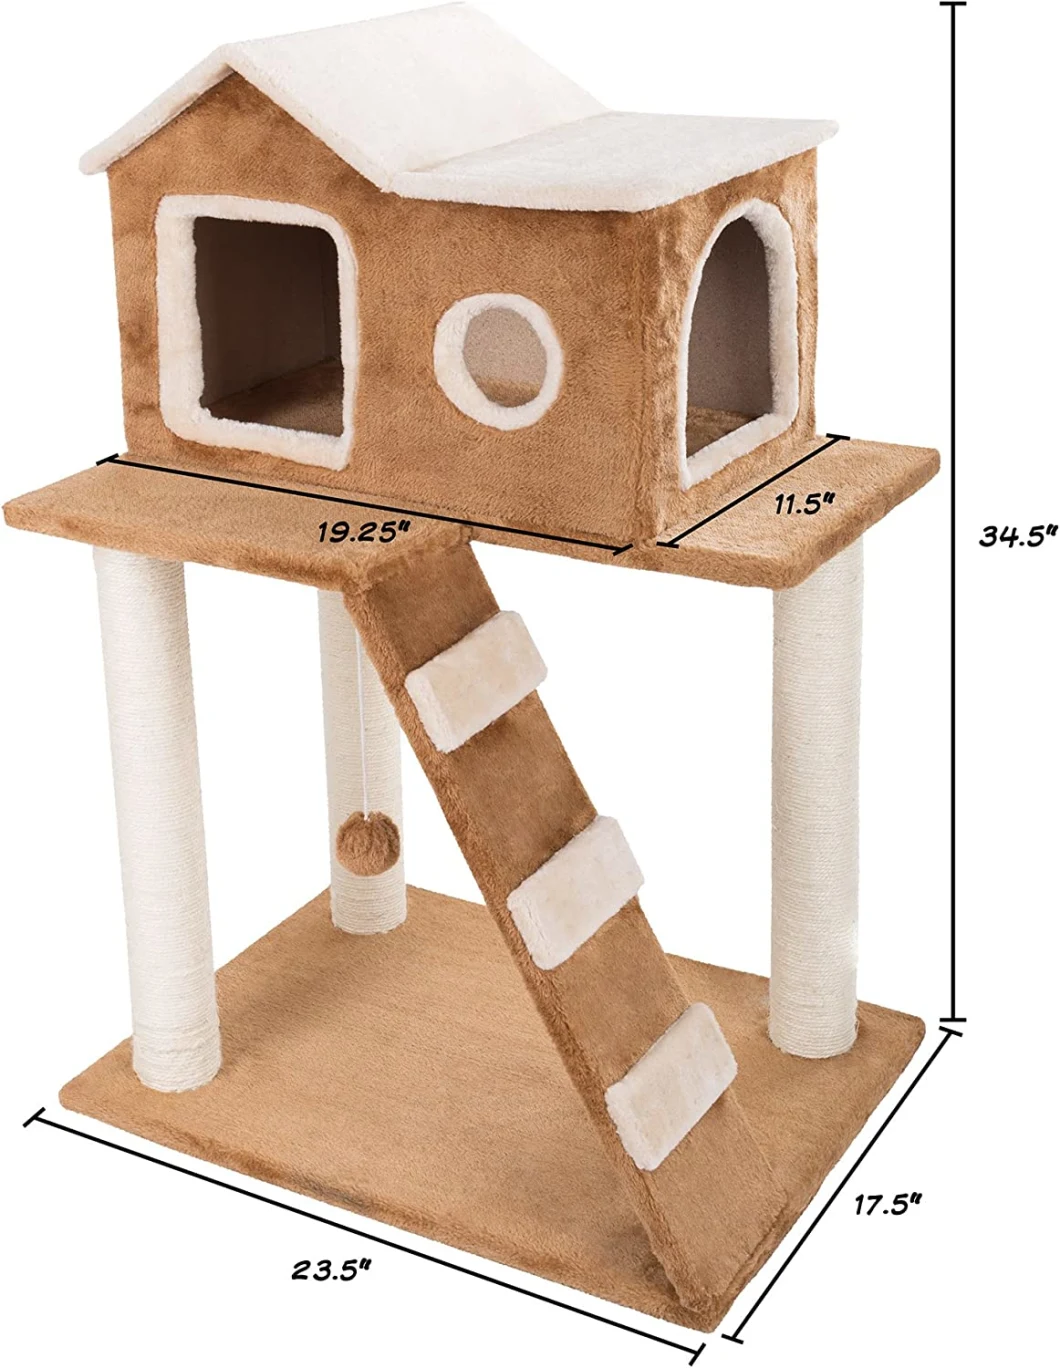 3 Tier Cat Tree- Plush Multilevel Cat Tower with Scratching Posts, Climbing Ladder, Cat Condo and Hanging Toy for Cats and Kittens by